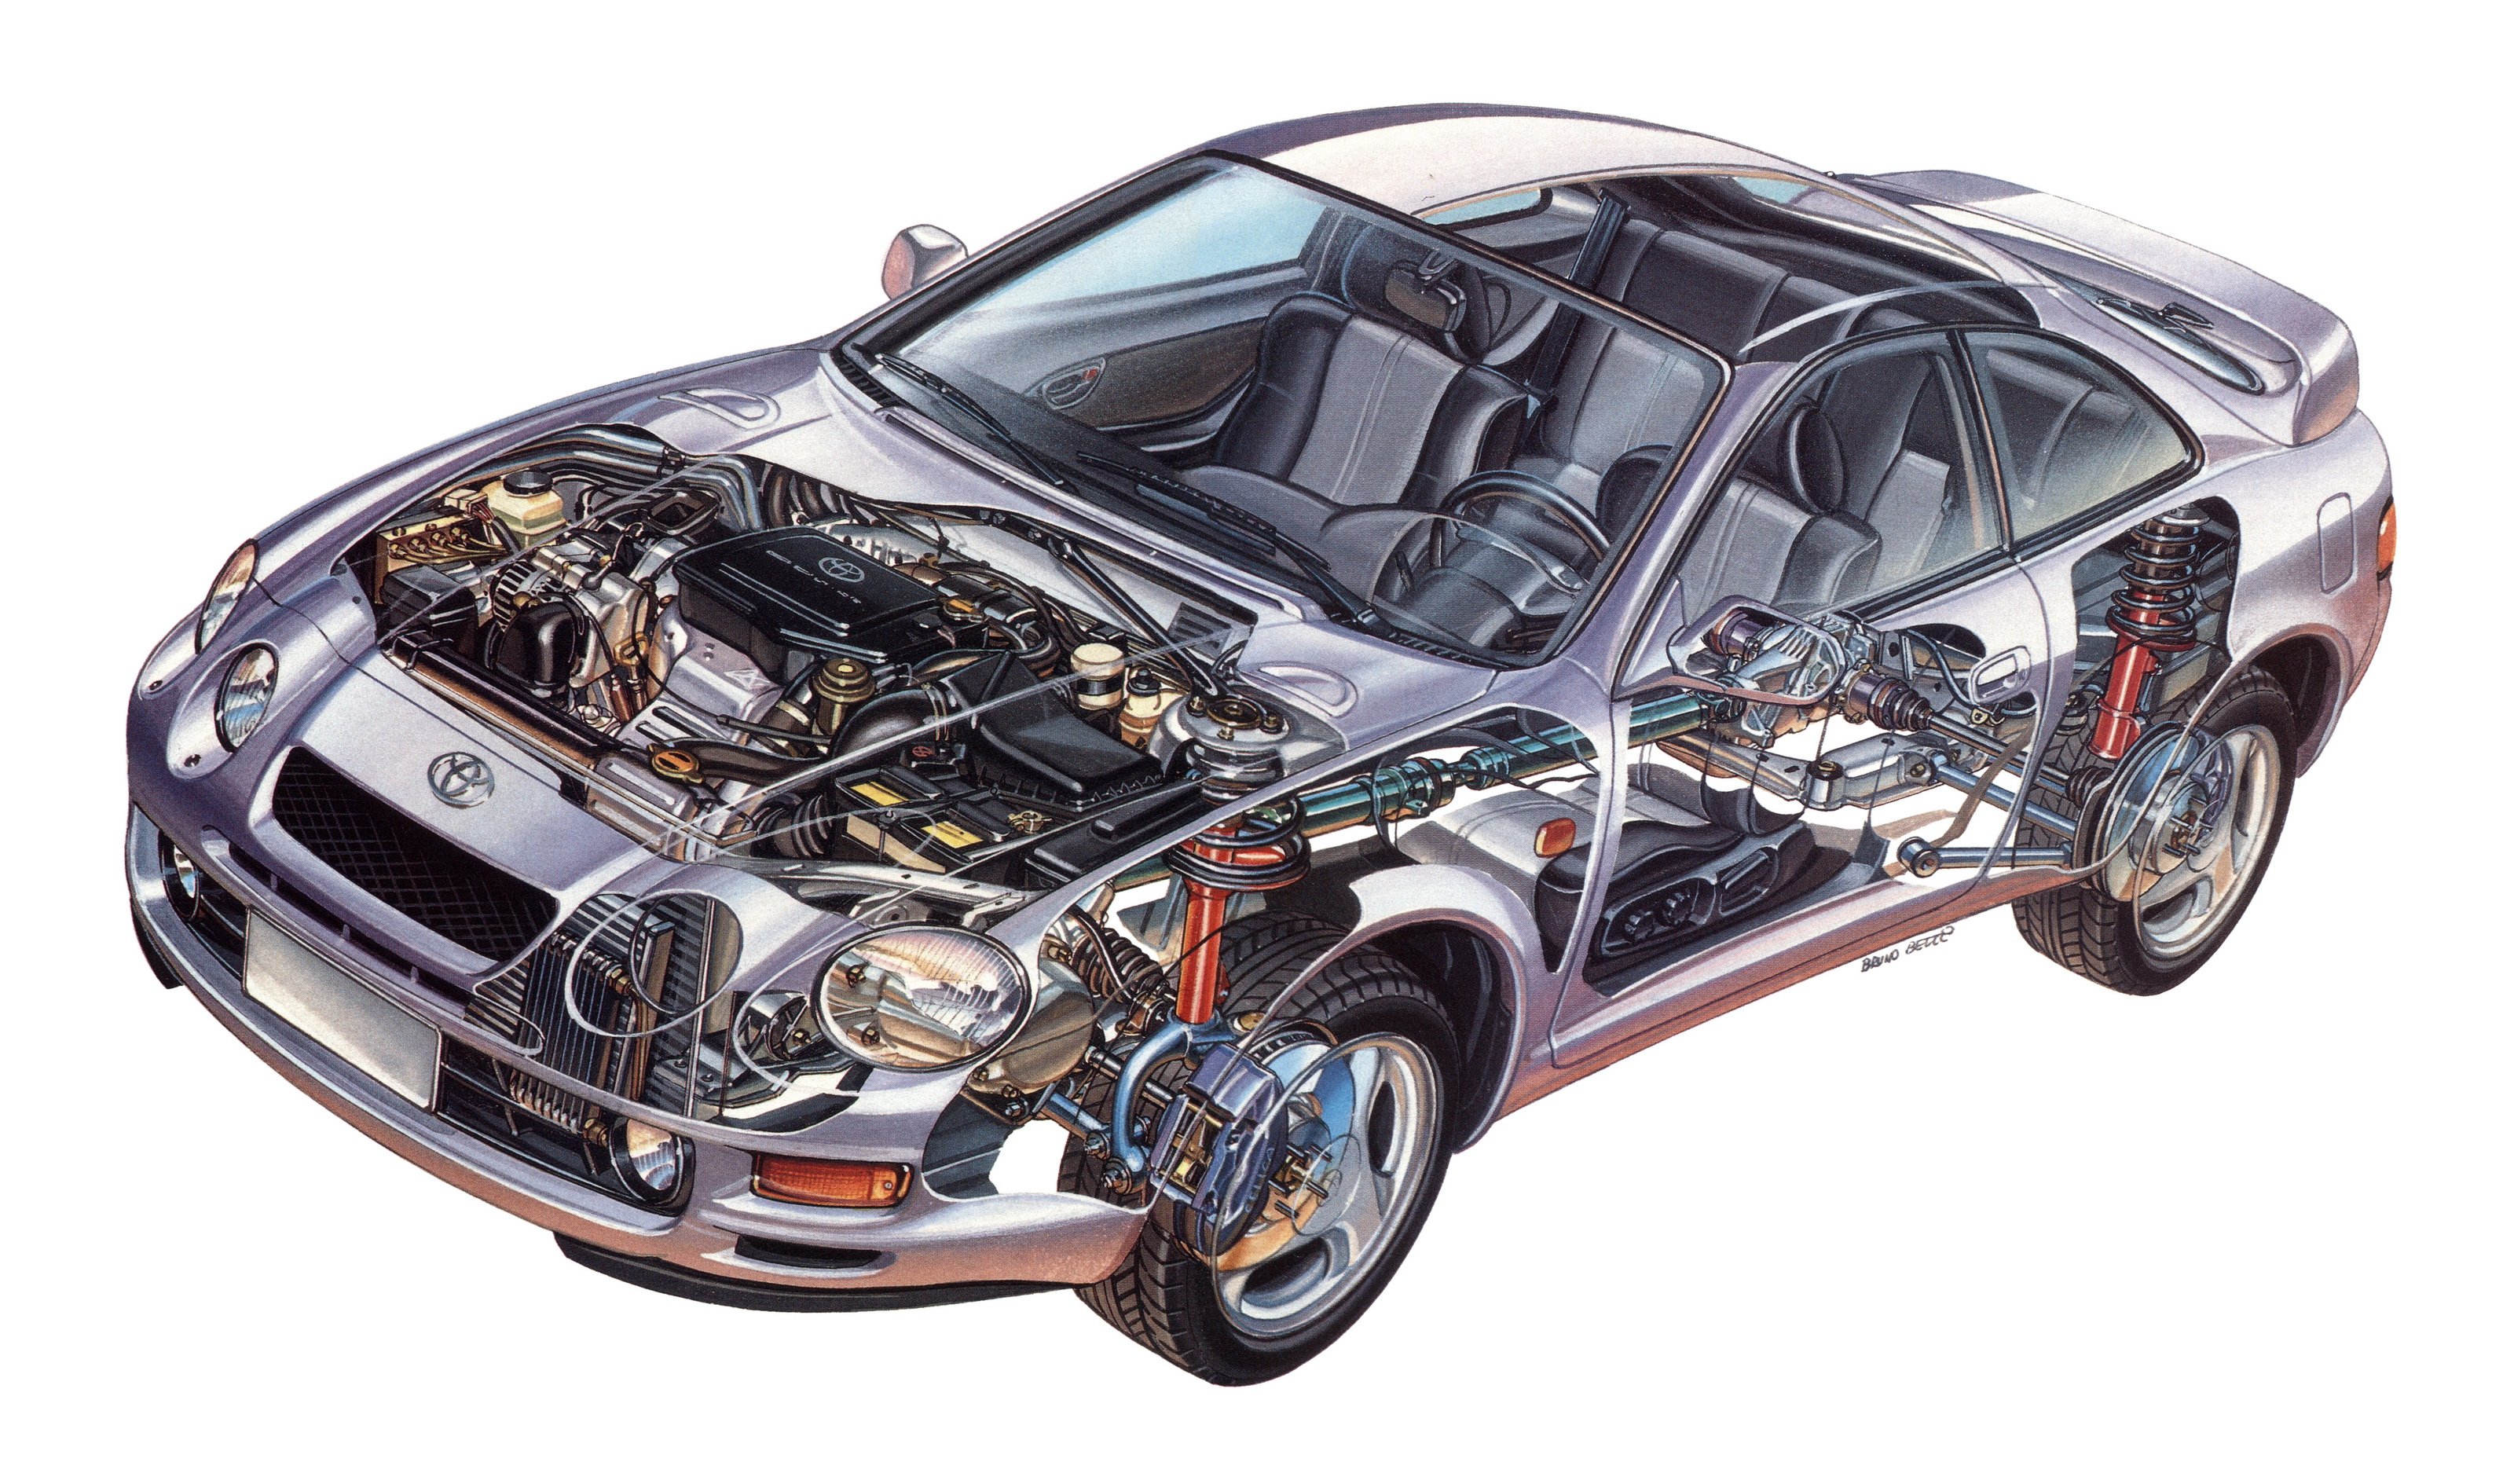 toyota, Celica, Gt, Coupe, Cars, Technical, Cutaway Wallpaper